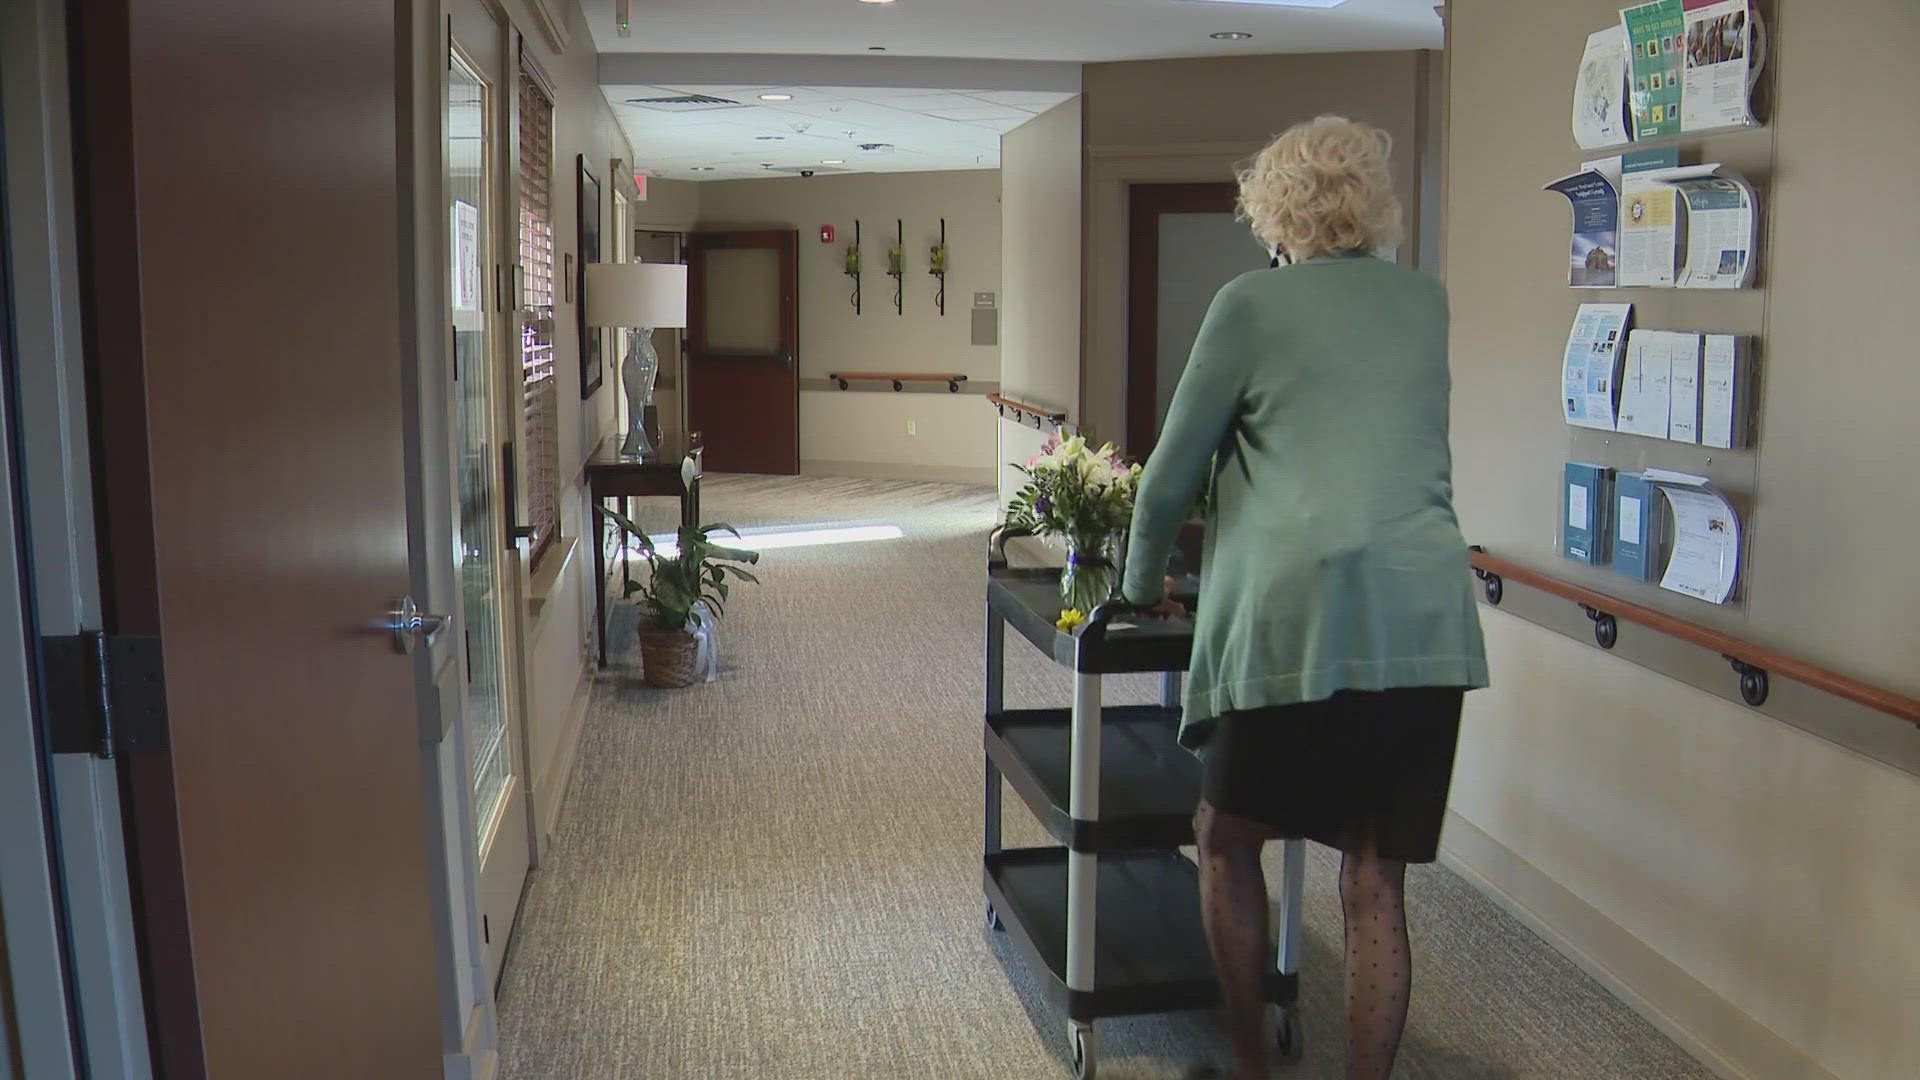 In the heart of Evelyn's House, a hospice facility dedicated to providing comfort in life's final moments, resides 79-year-old Anne Hensley.